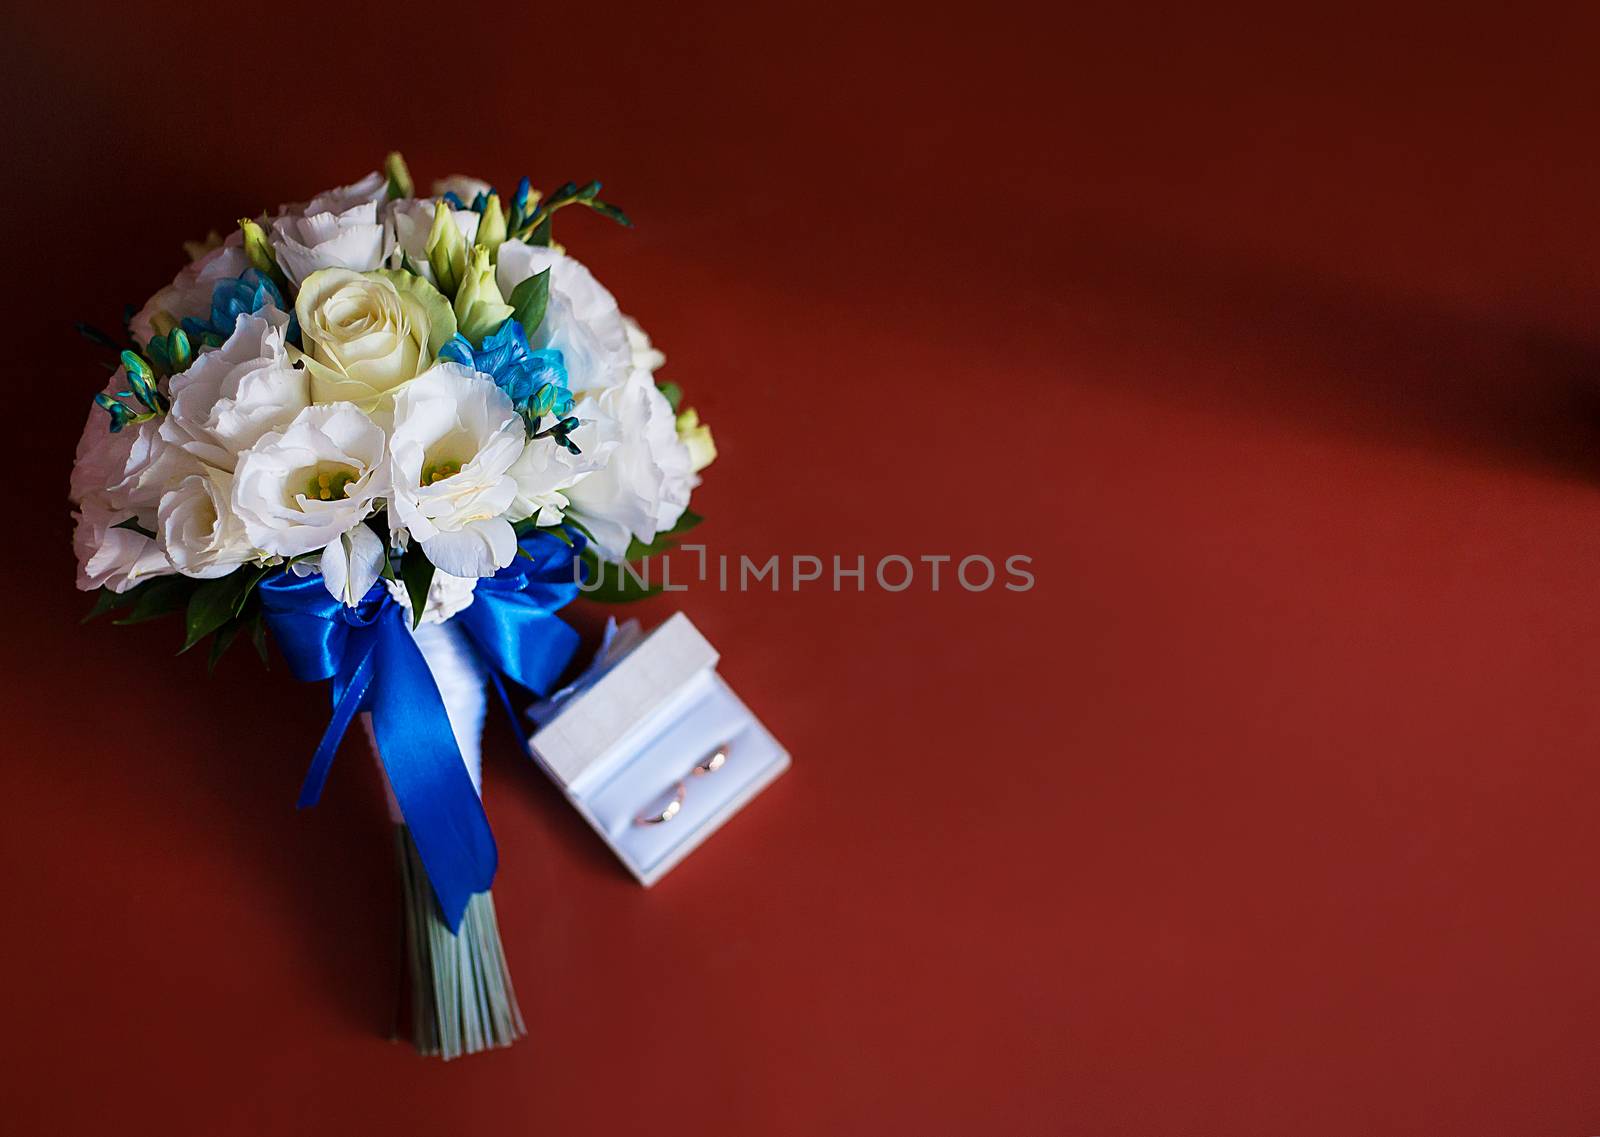 Wedding rings with a bridal bouquet of white roses by sfinks